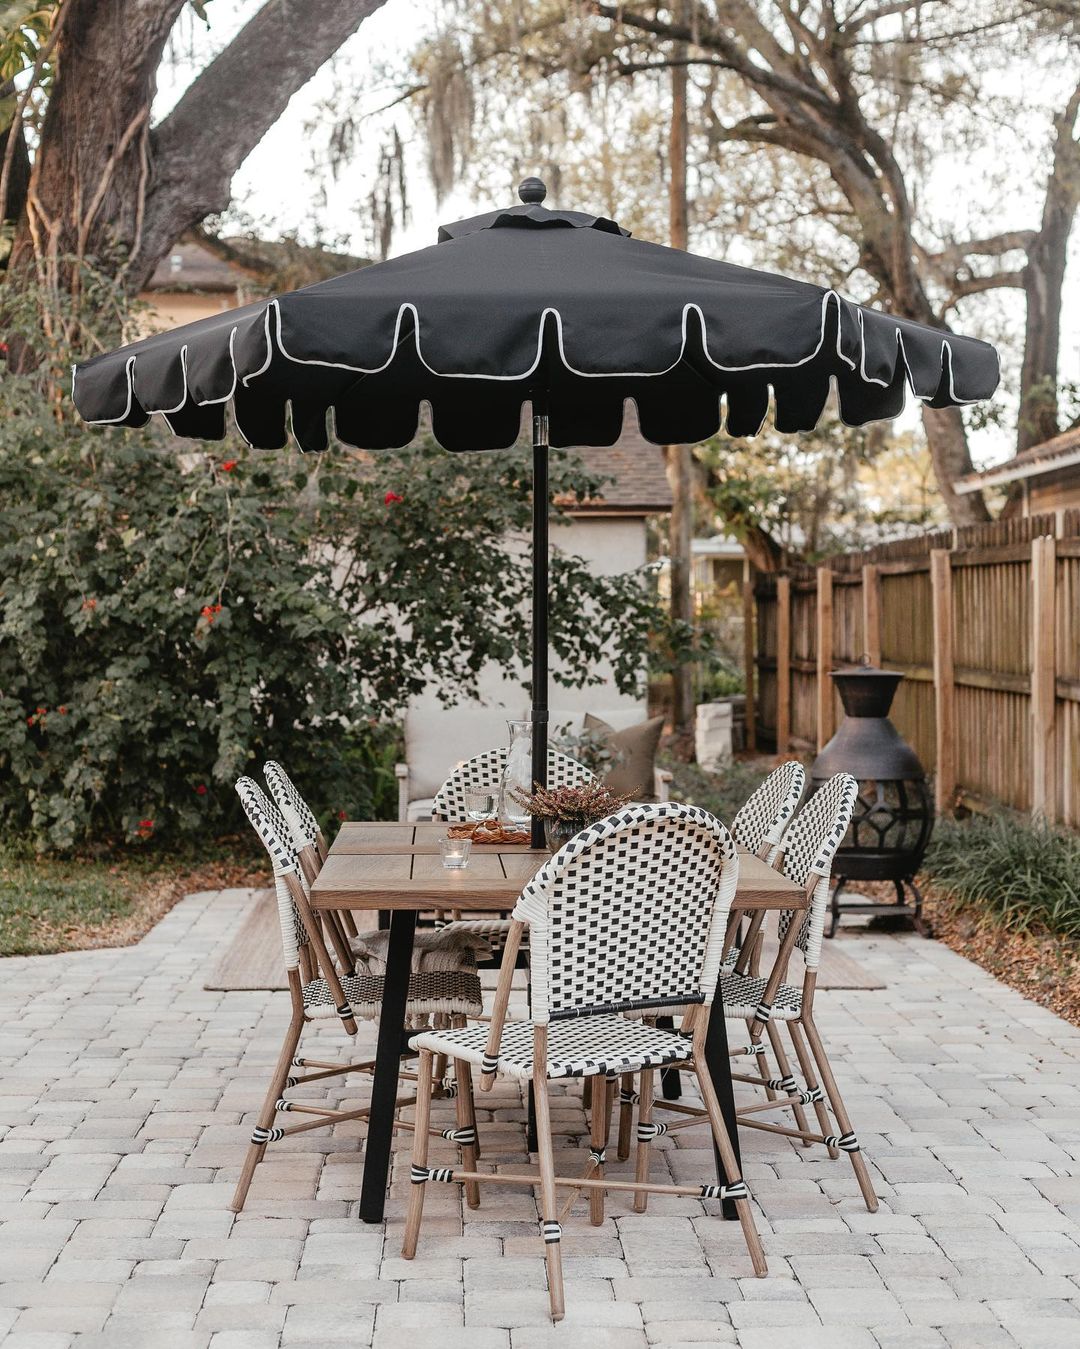 Backyard Patio with Table and Umbrella. Photo by Instagram user @jennasuedesign